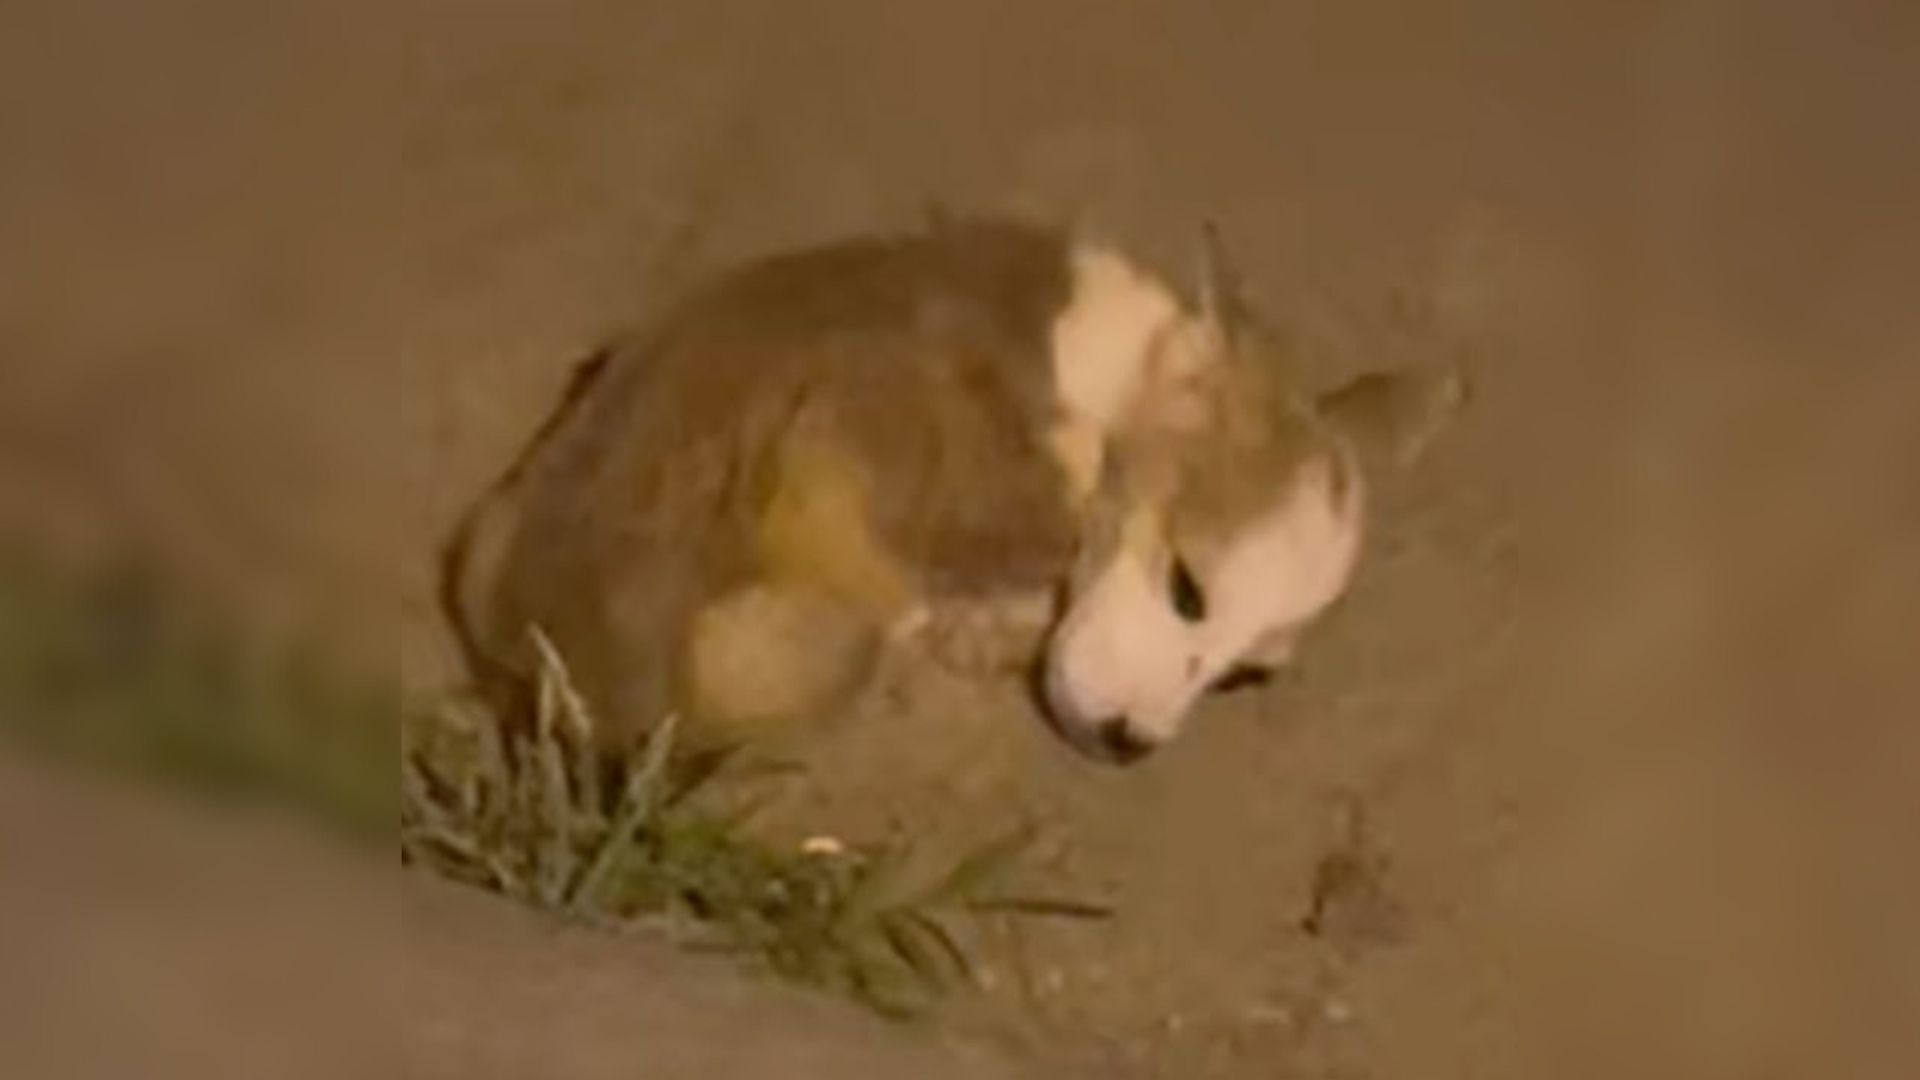 Malnourished Puppy Lying In A Parking Lot Could Not Even Move Until His Rescuers Came To Help